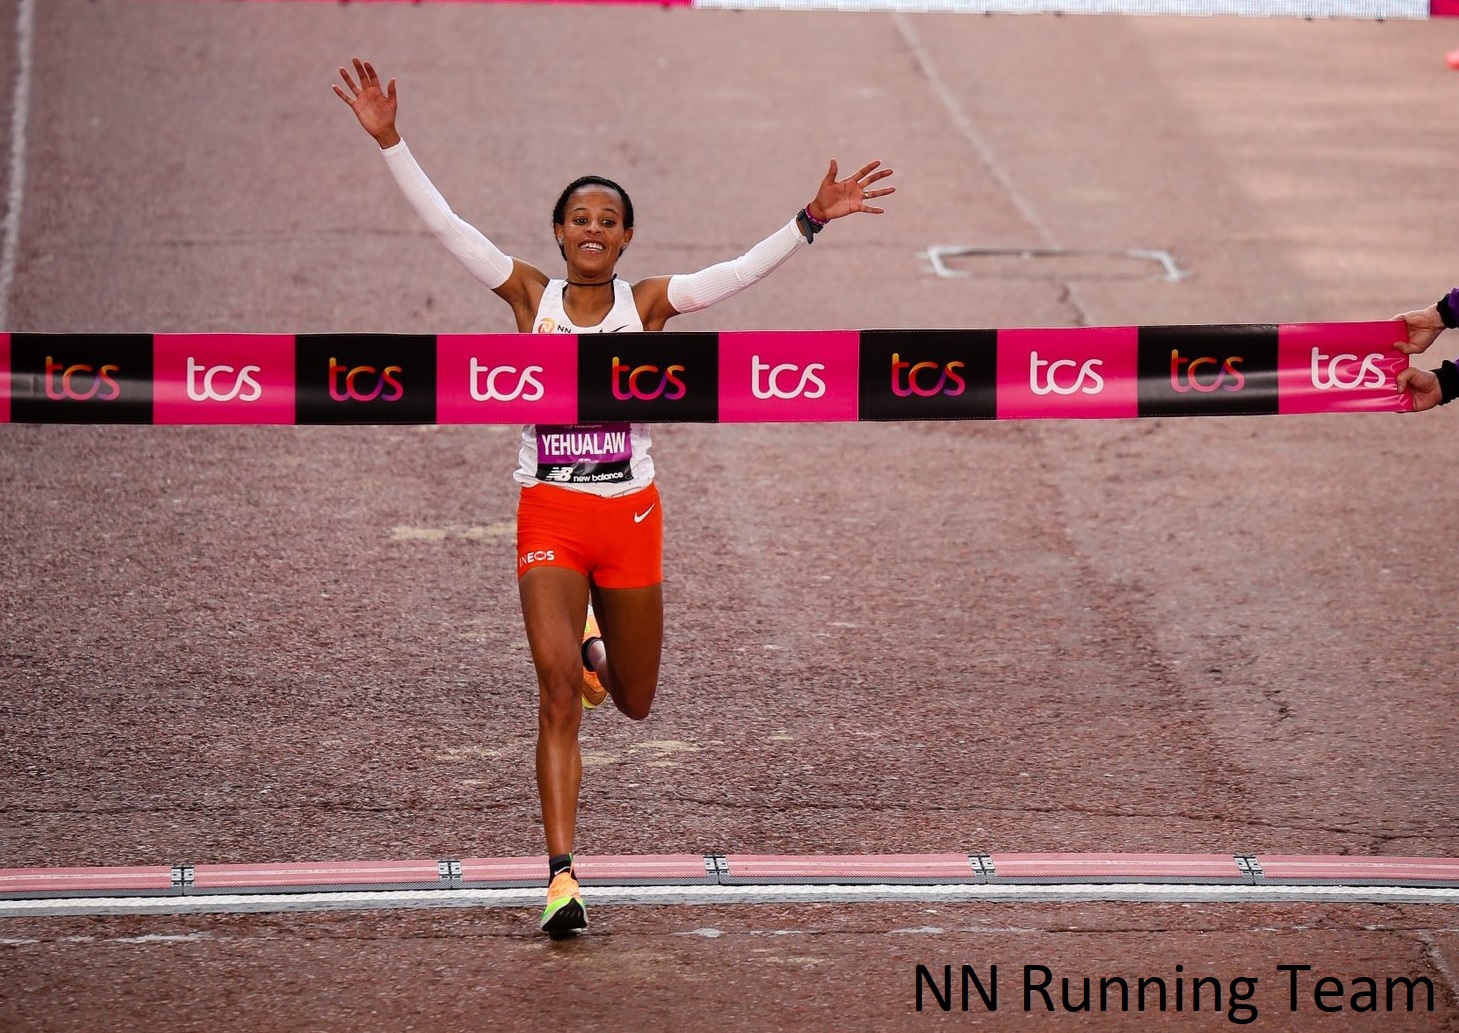 Ethiopia's Yalemzerf Yehualaw wins the 2022 TCS London Marathon in 2:17:26, the third-fastest women's time in race history